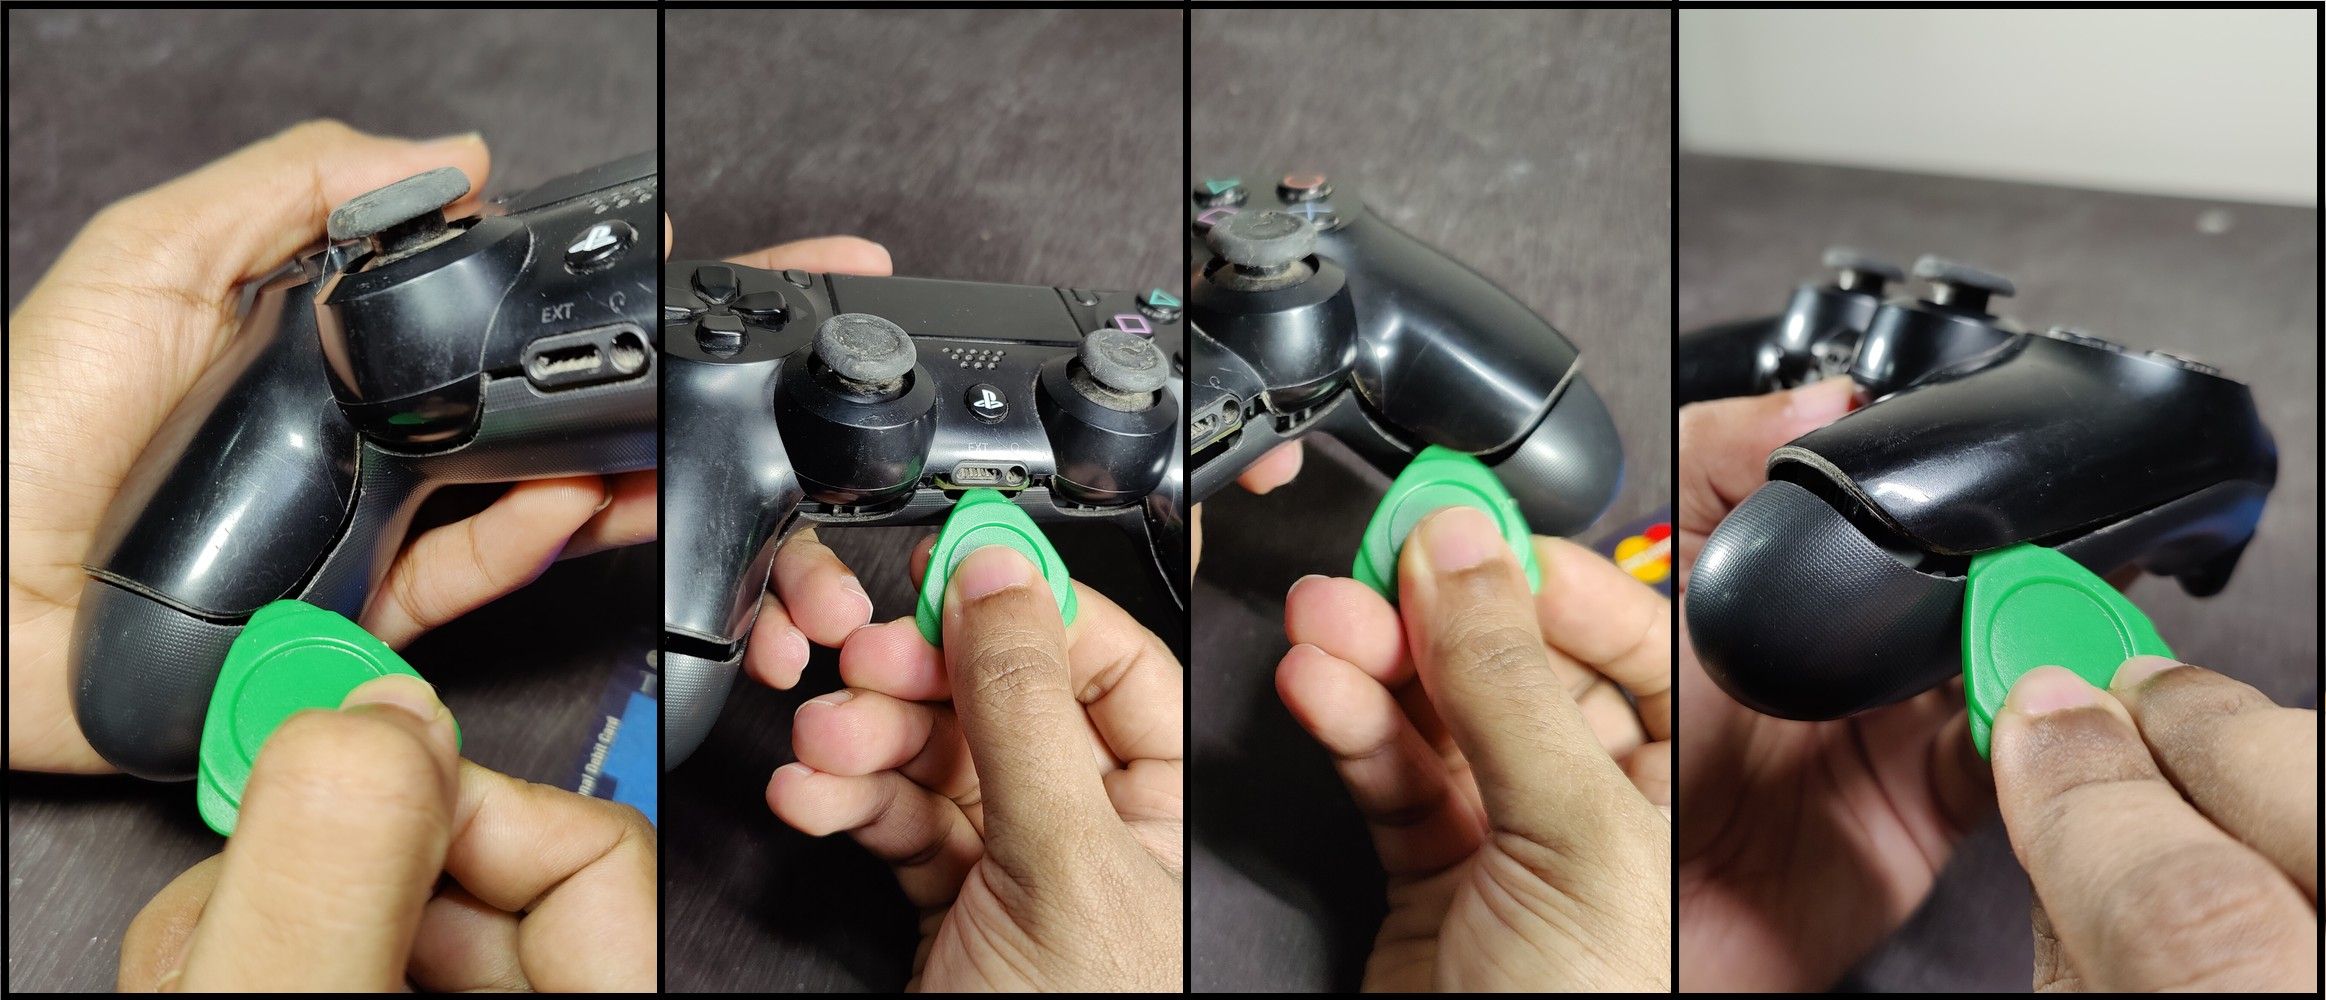 How to pry open PS4 controller.